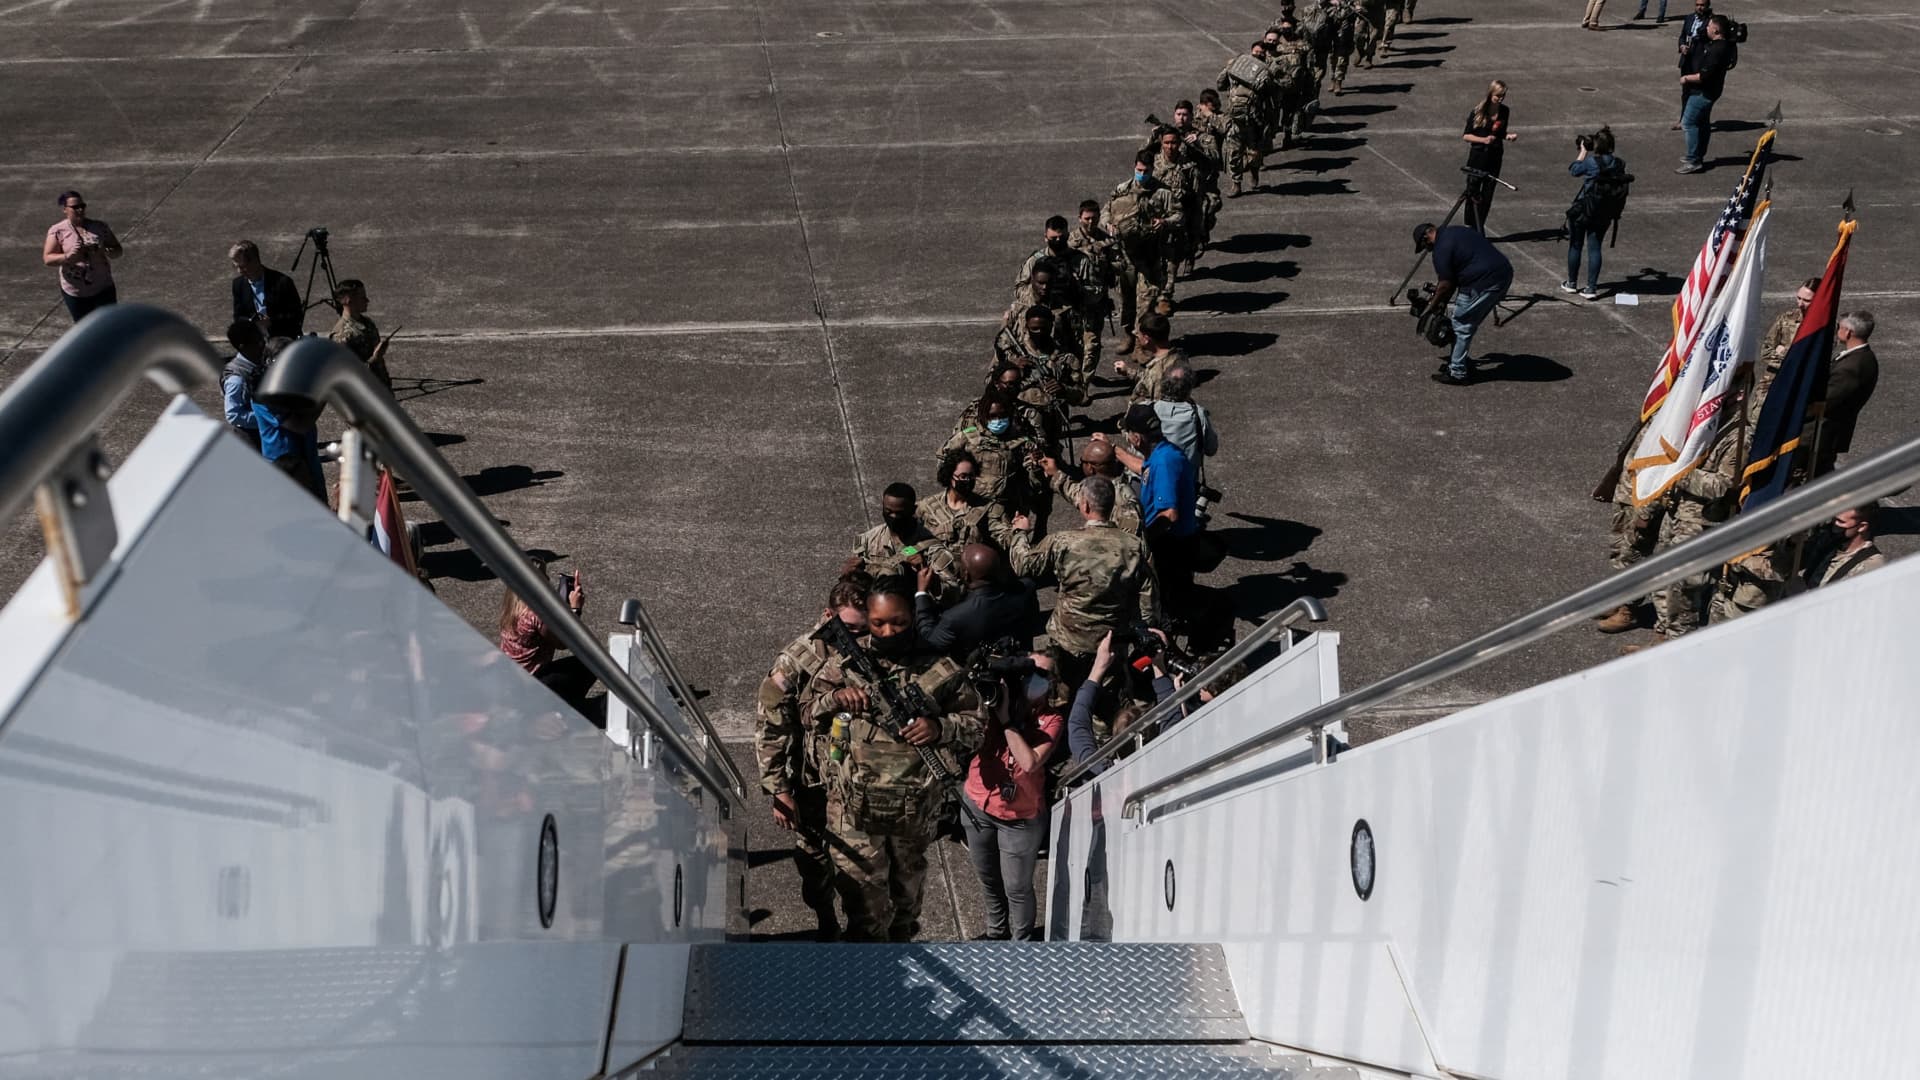 Soldiers from the U.S. Army’s 1st Armored Brigade Combat Team board a transport plane bound for eastern Europe on a deployment launched in response to the invasion of Ukraine by Russia, at Hunter Army Airfield, Georgia , U.S., March 2, 2022.